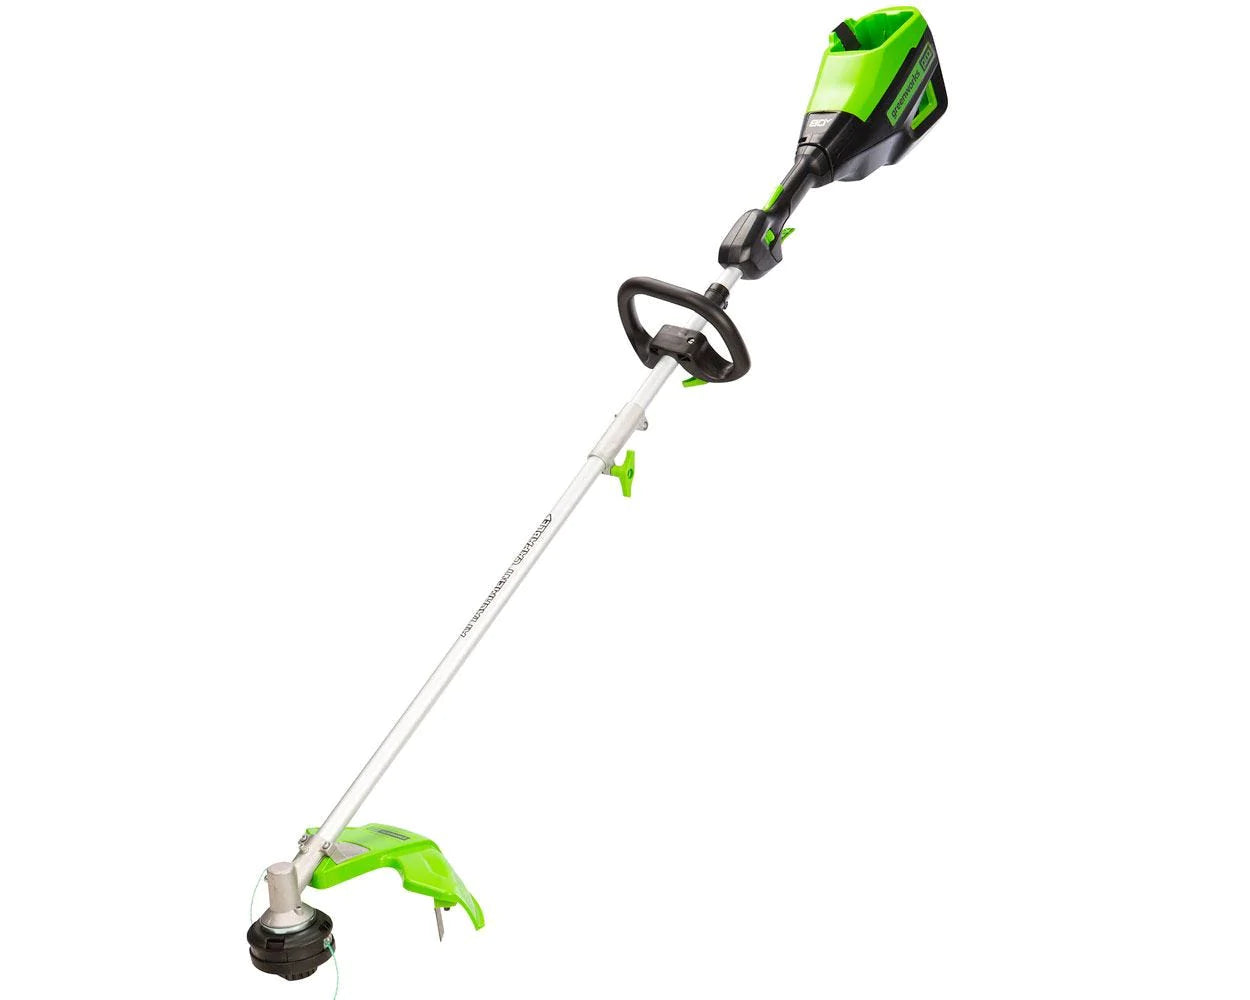 Rent to Own Greenworks 80V 21” Lawn Mower, 13” String Trimmer, and 730 Lear Blower  Combo with 4 Ah Battery & Charger) 3-piece combo - Green at Aaron's today!